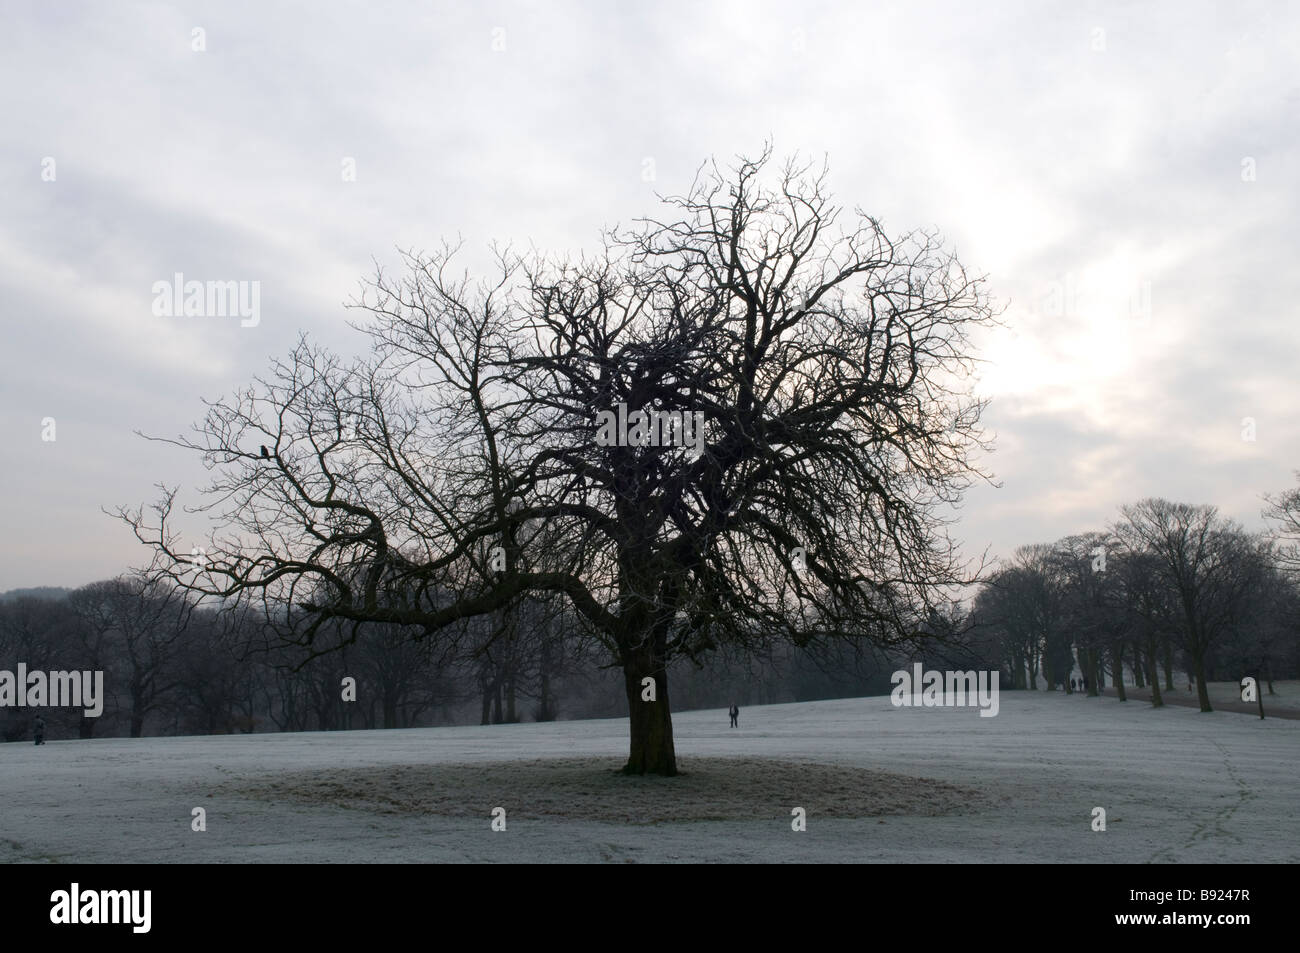 A solitary tree in Roundhay park, Leeds, England Stock Photo